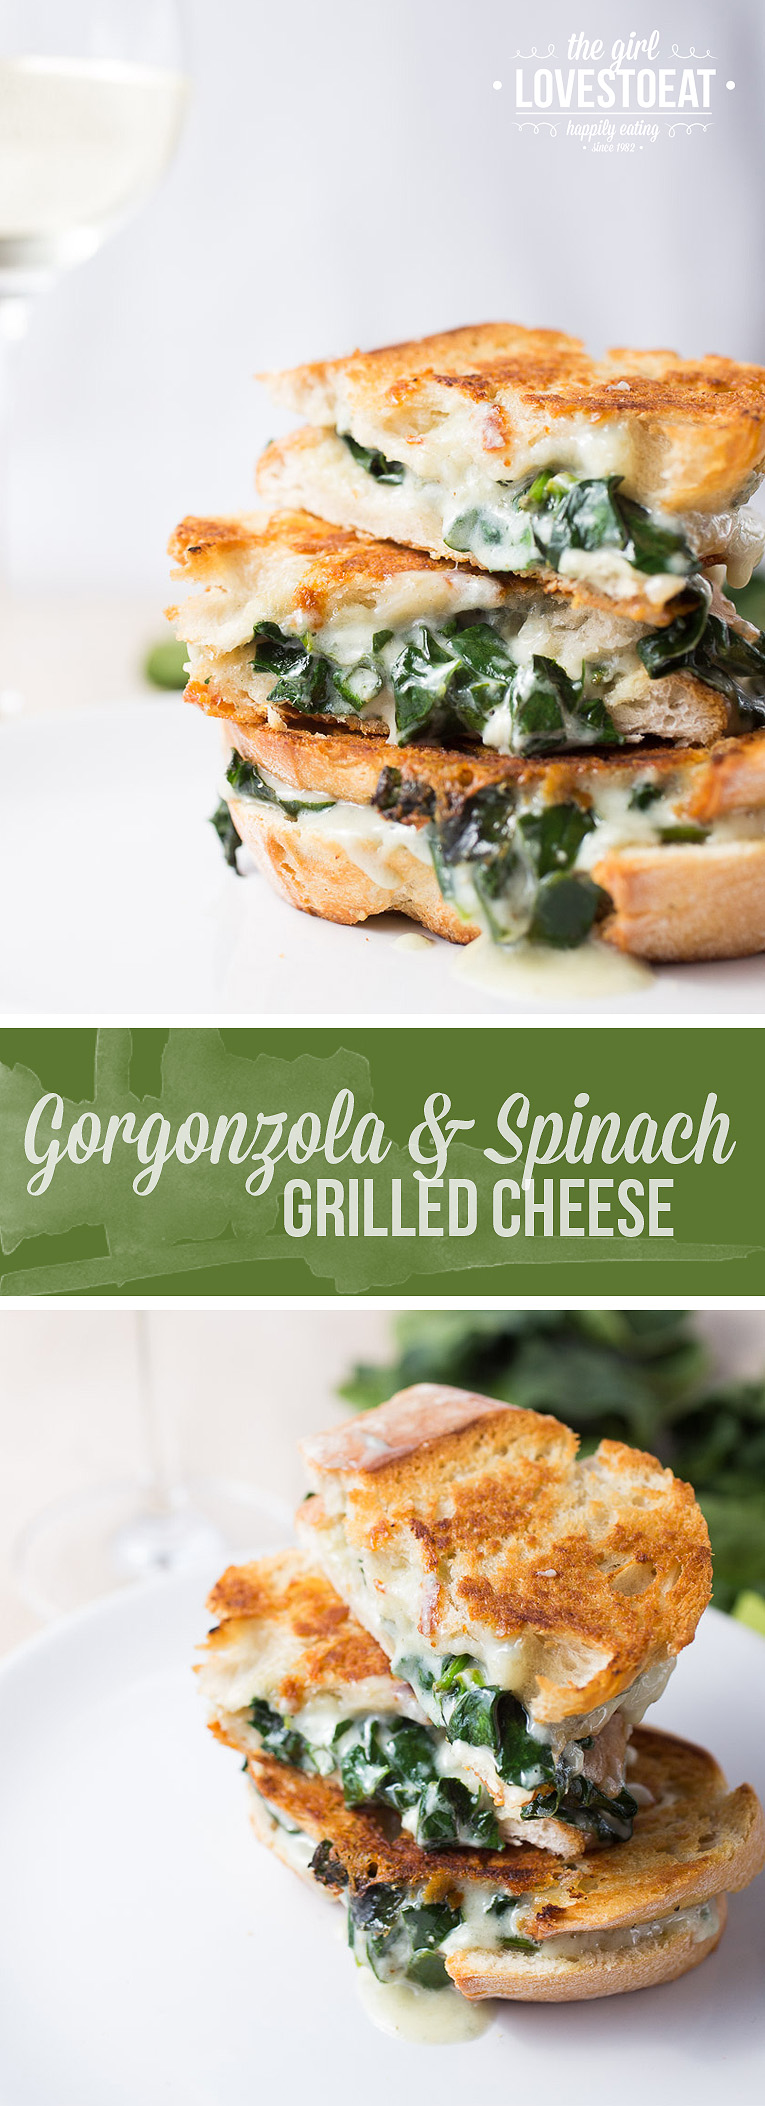 Gorgonzola and spinach grilled cheese